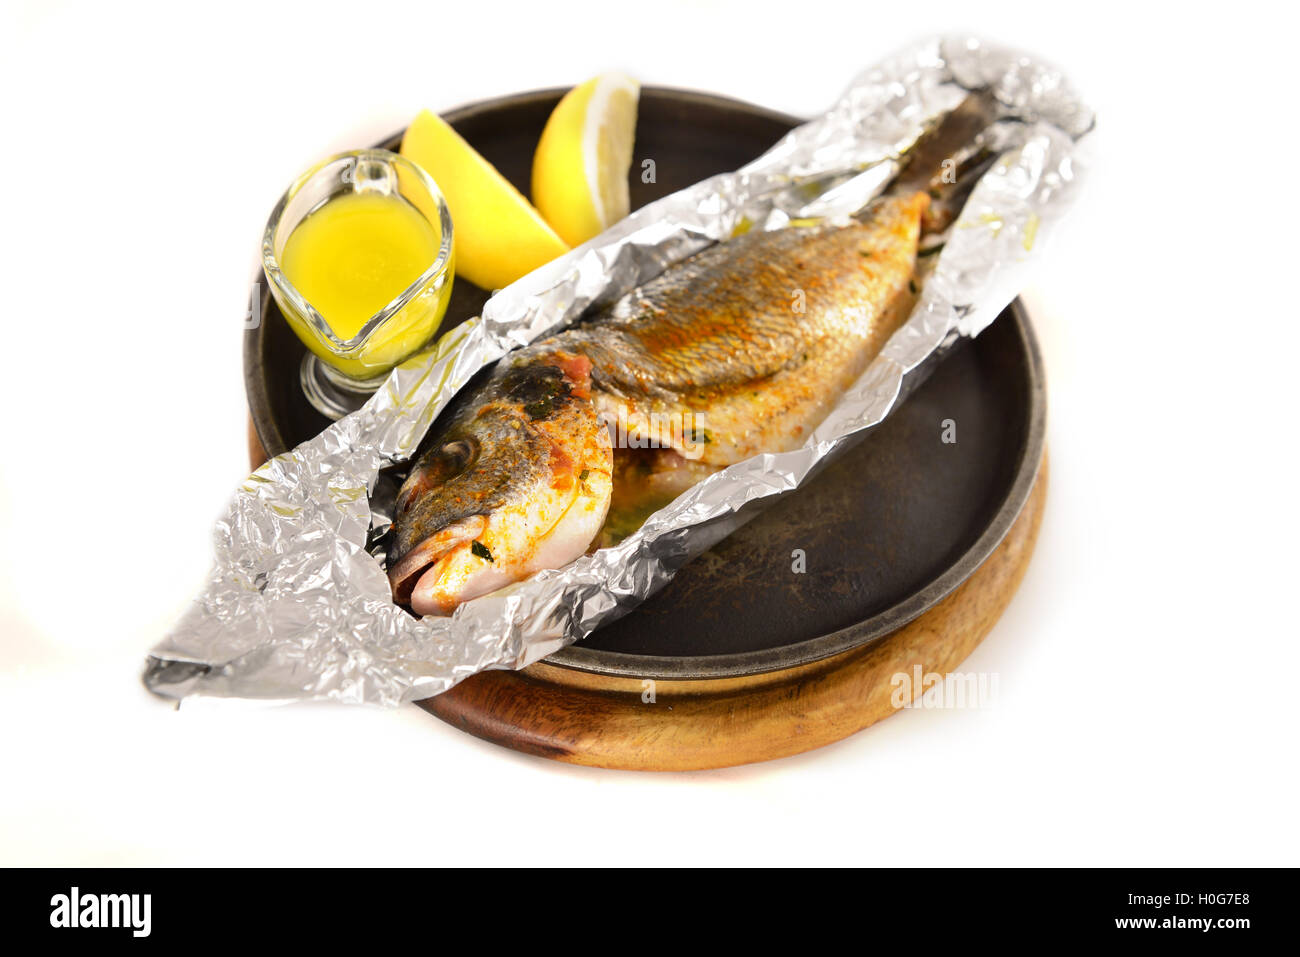 Grilled fish in foil uith lemon juice sauce in black pan on wooden cutting board Stock Photo